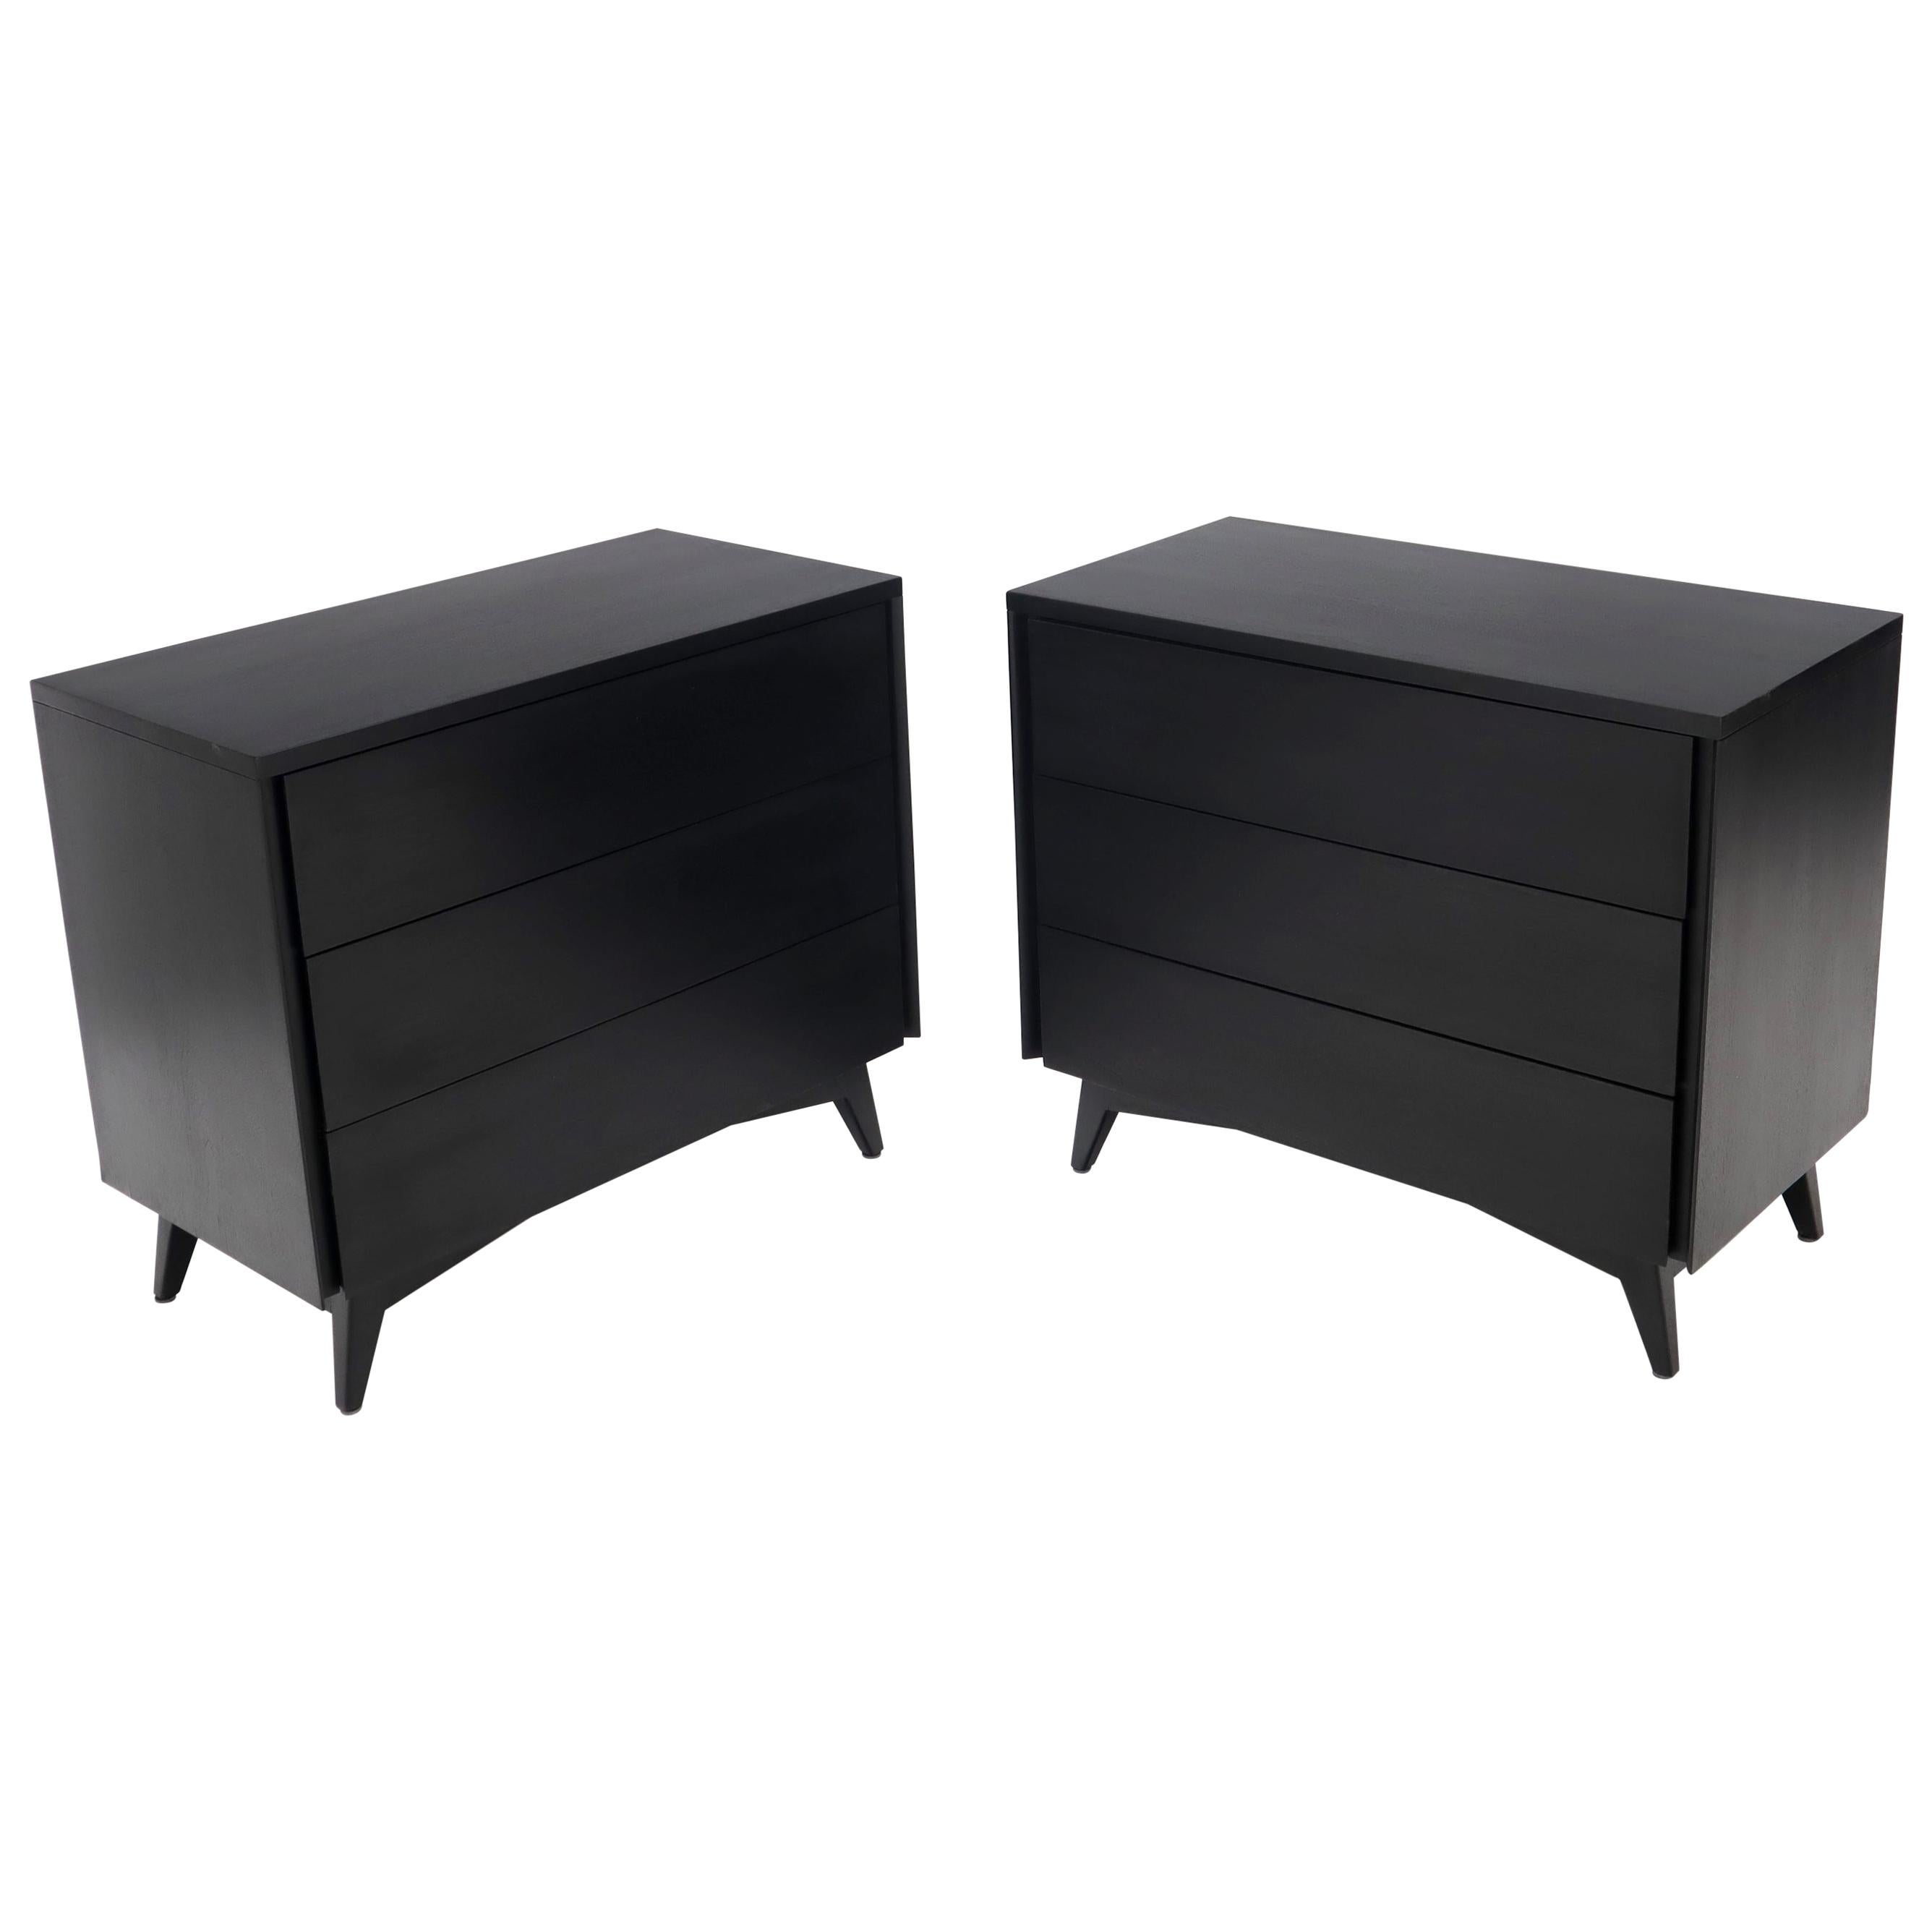 Pair of Black Lacquer Mahogany Mid-Century Modern Bachelor Chests